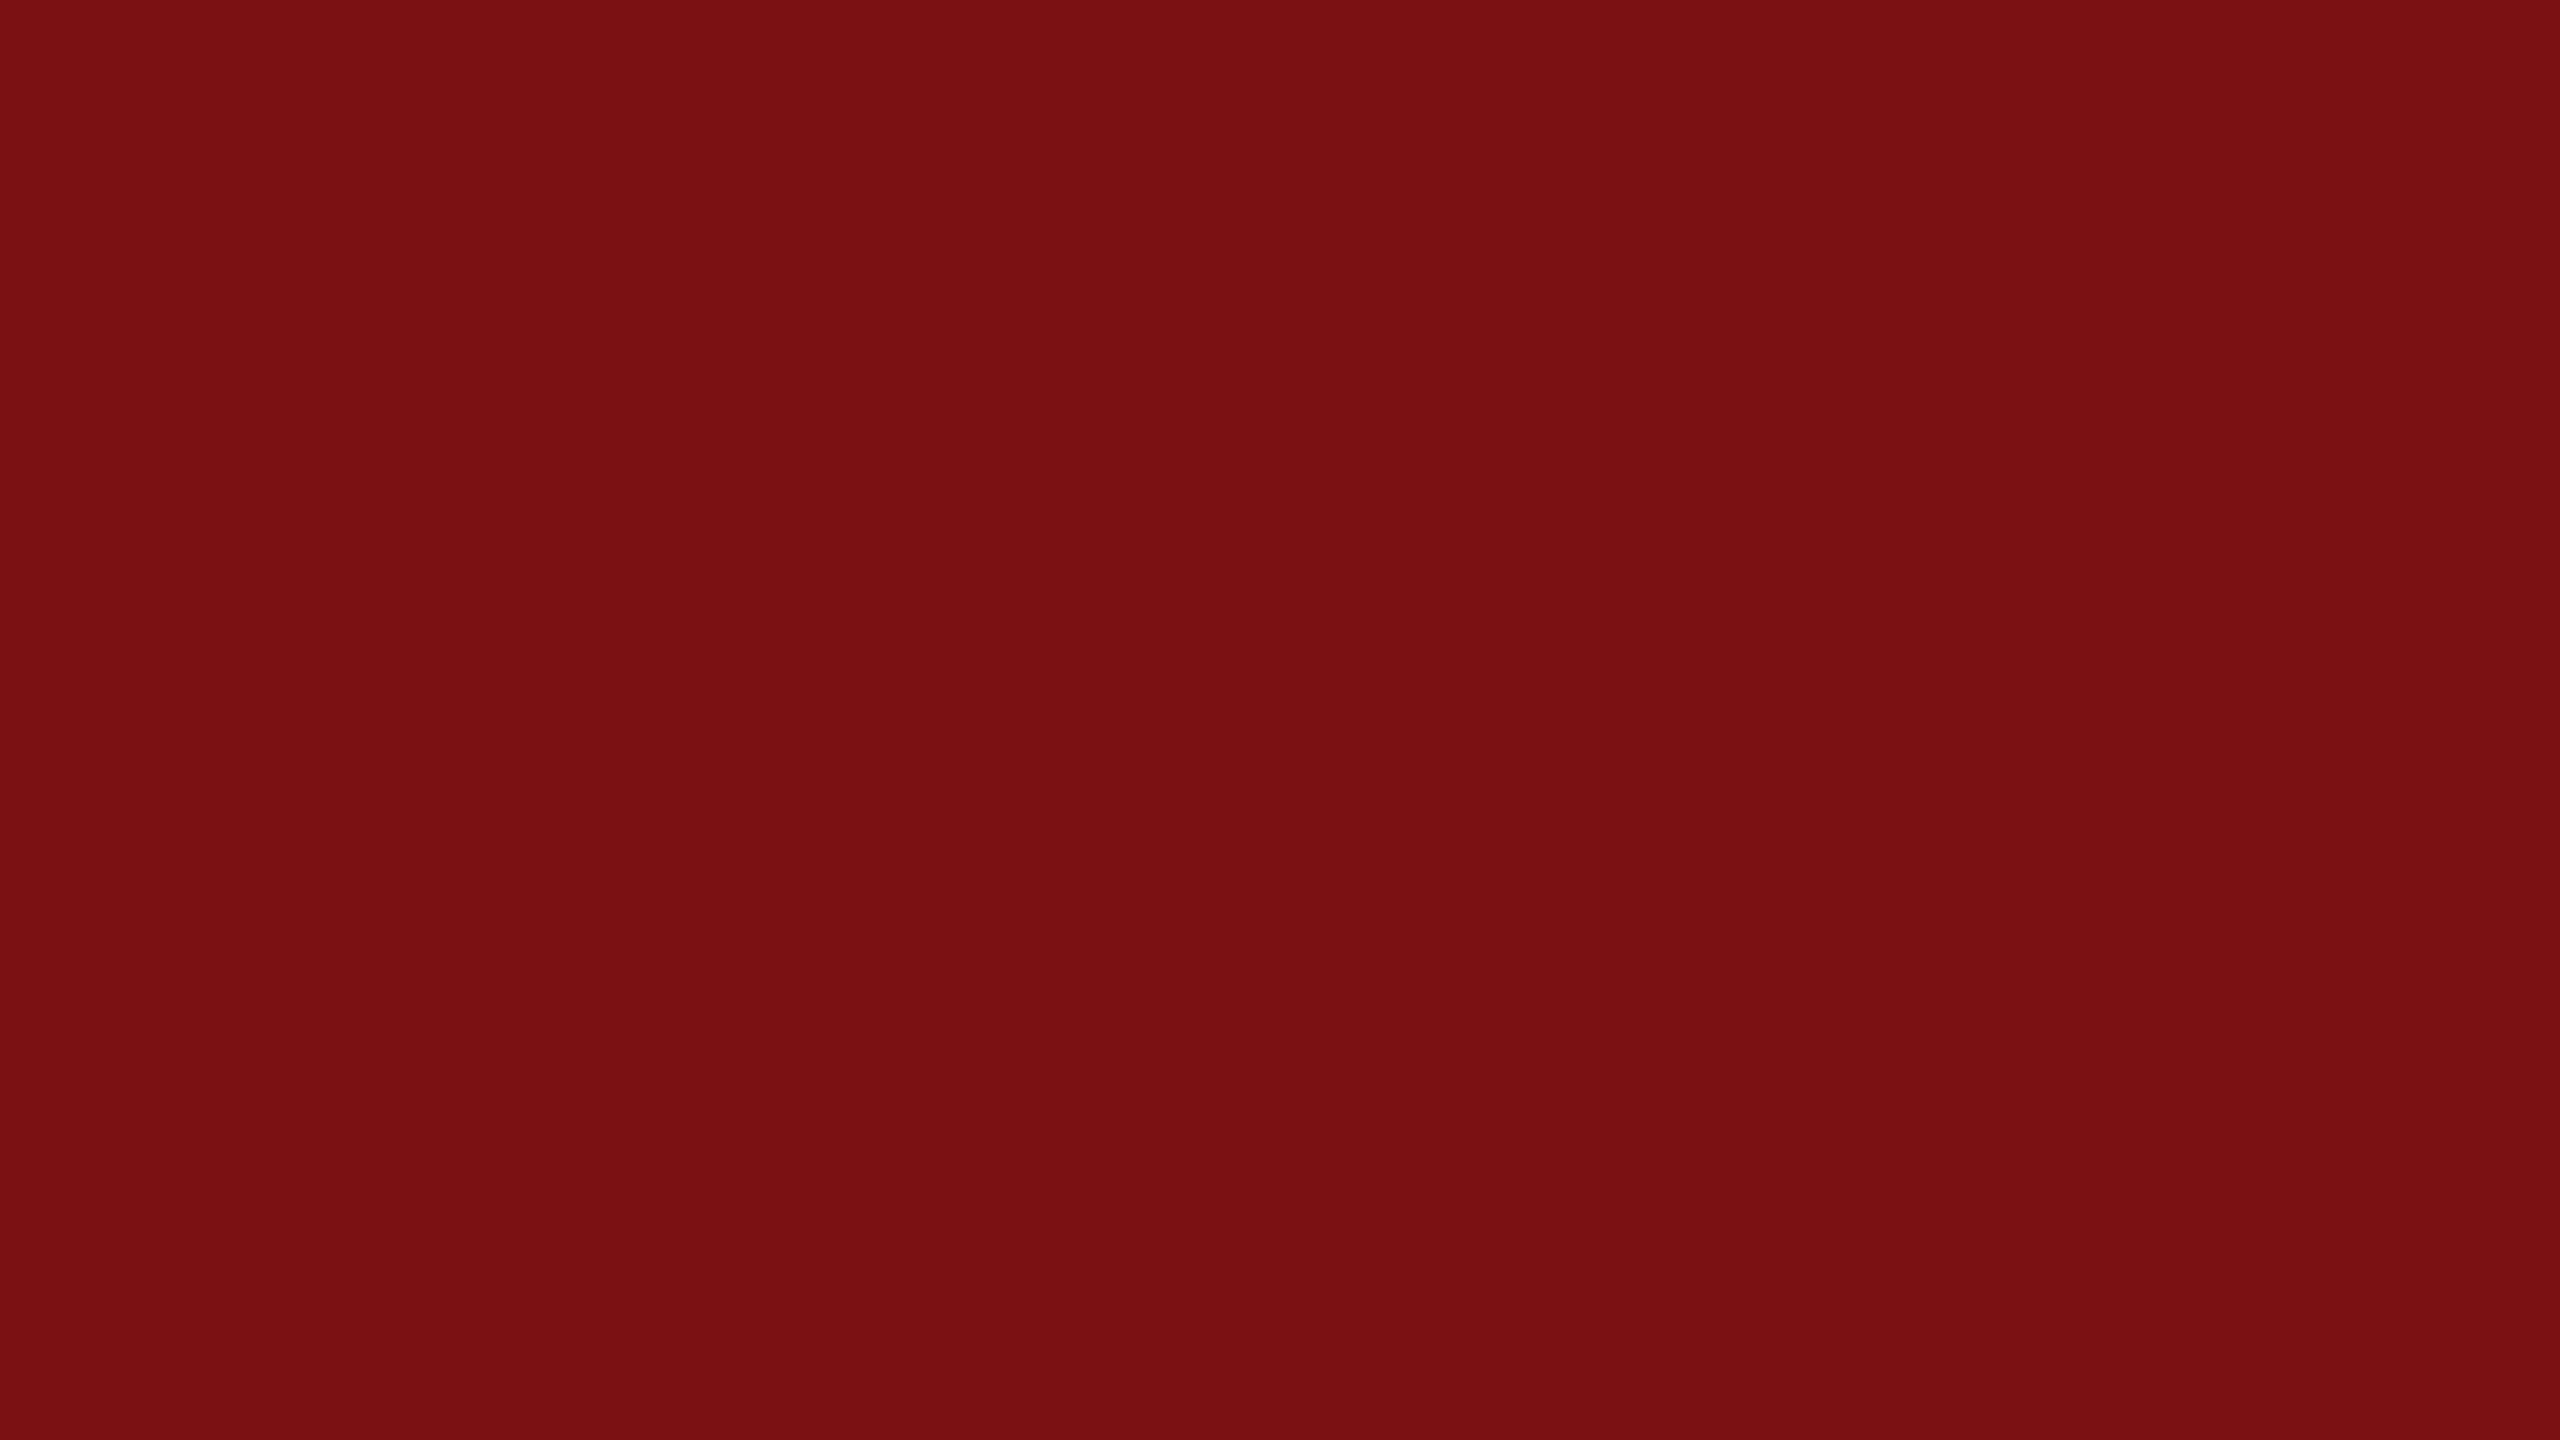 2560x1440-up-maroon-solid-color-background.jpg